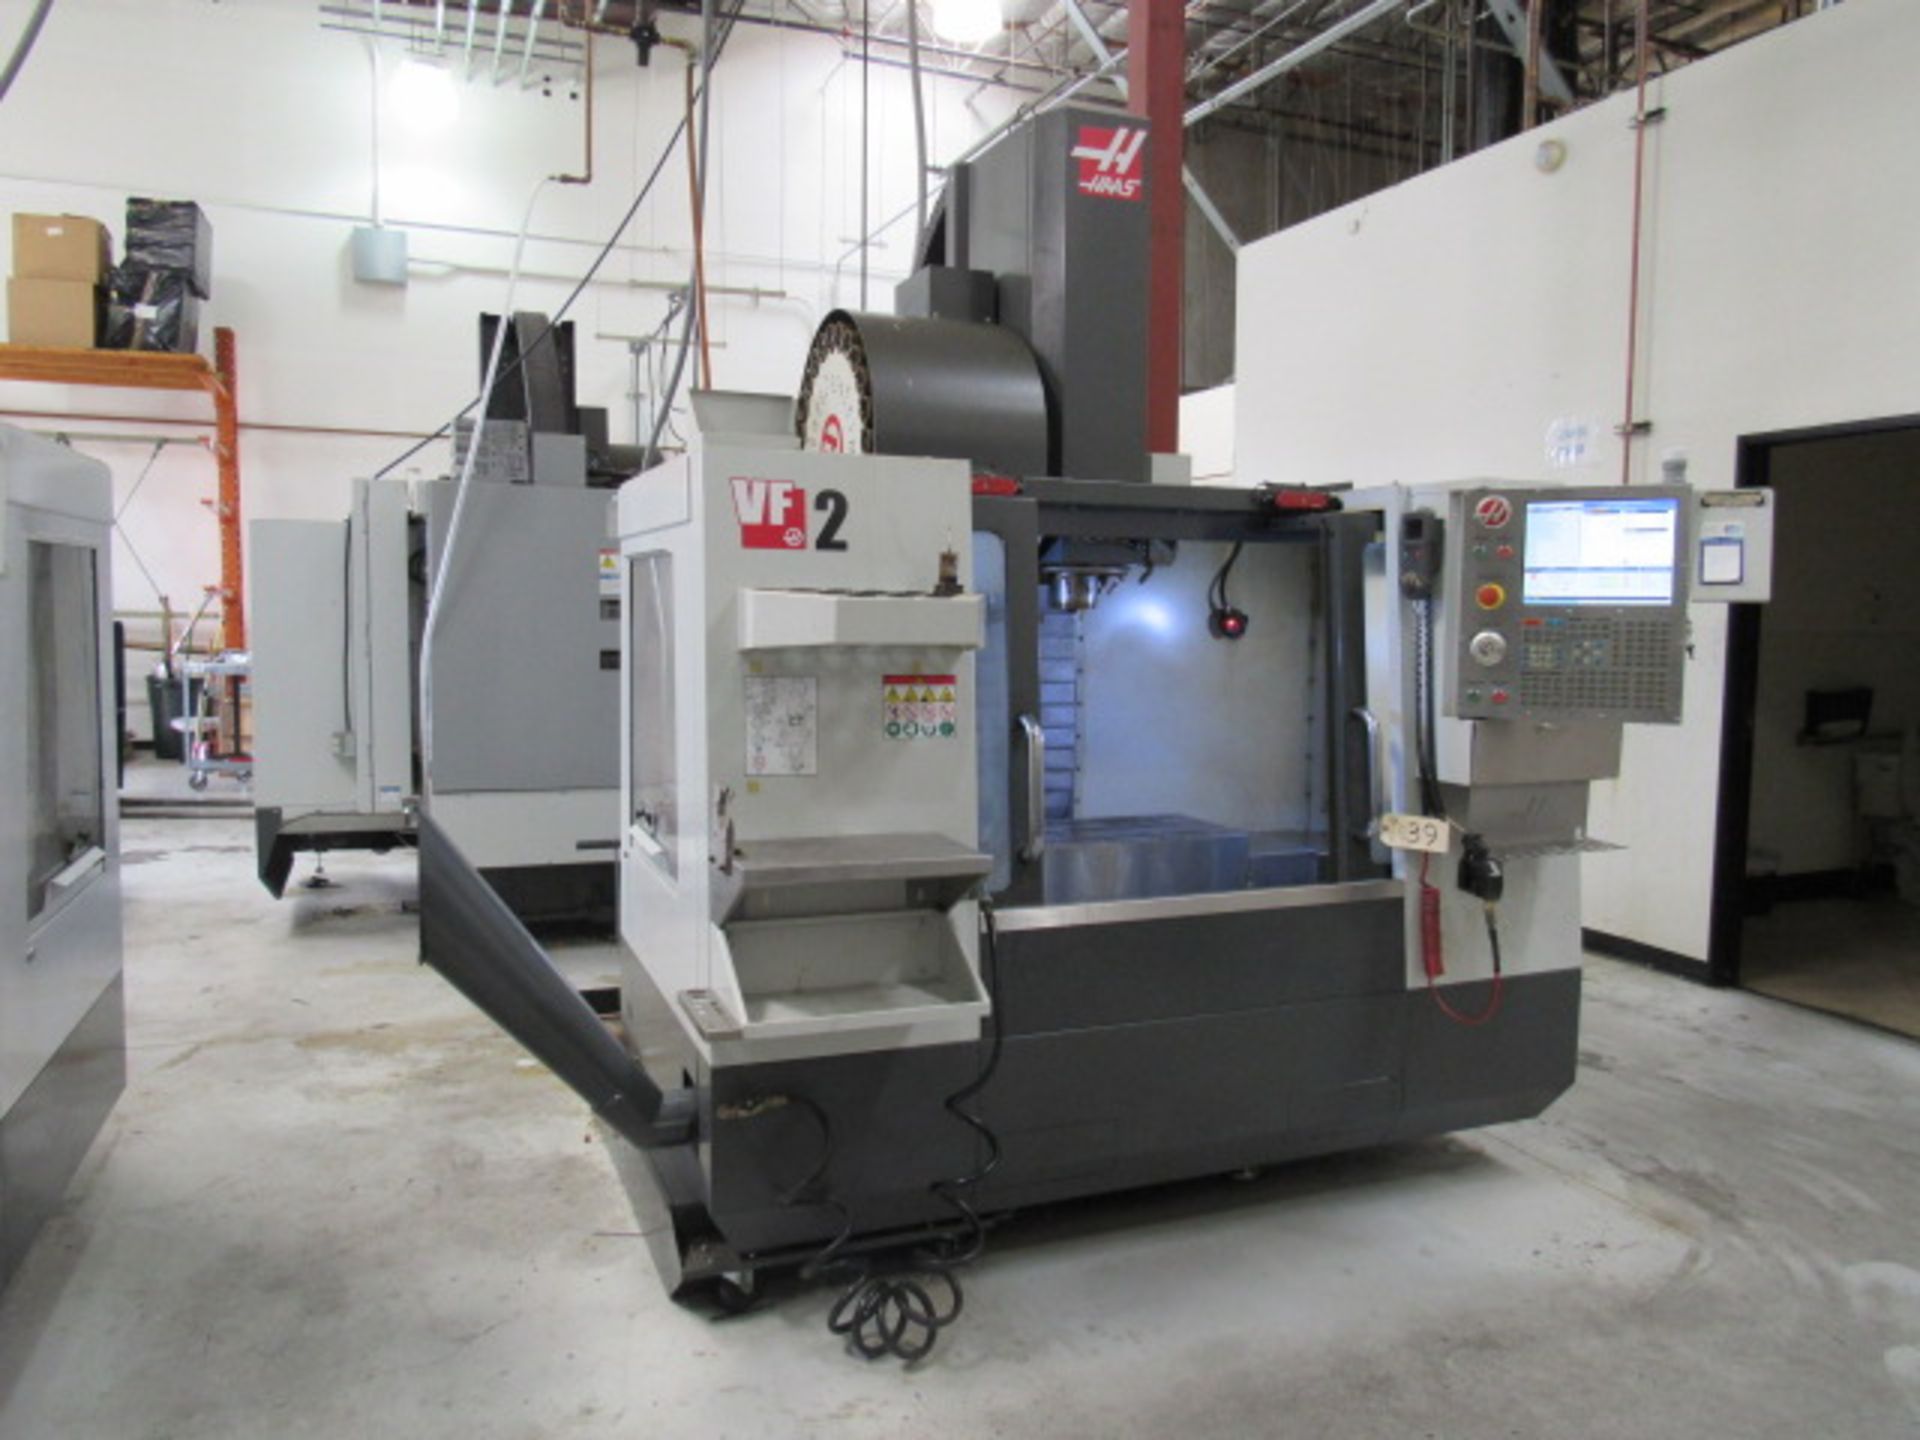 Haas VF2 CNC Vertical Machining Center - Image 6 of 9